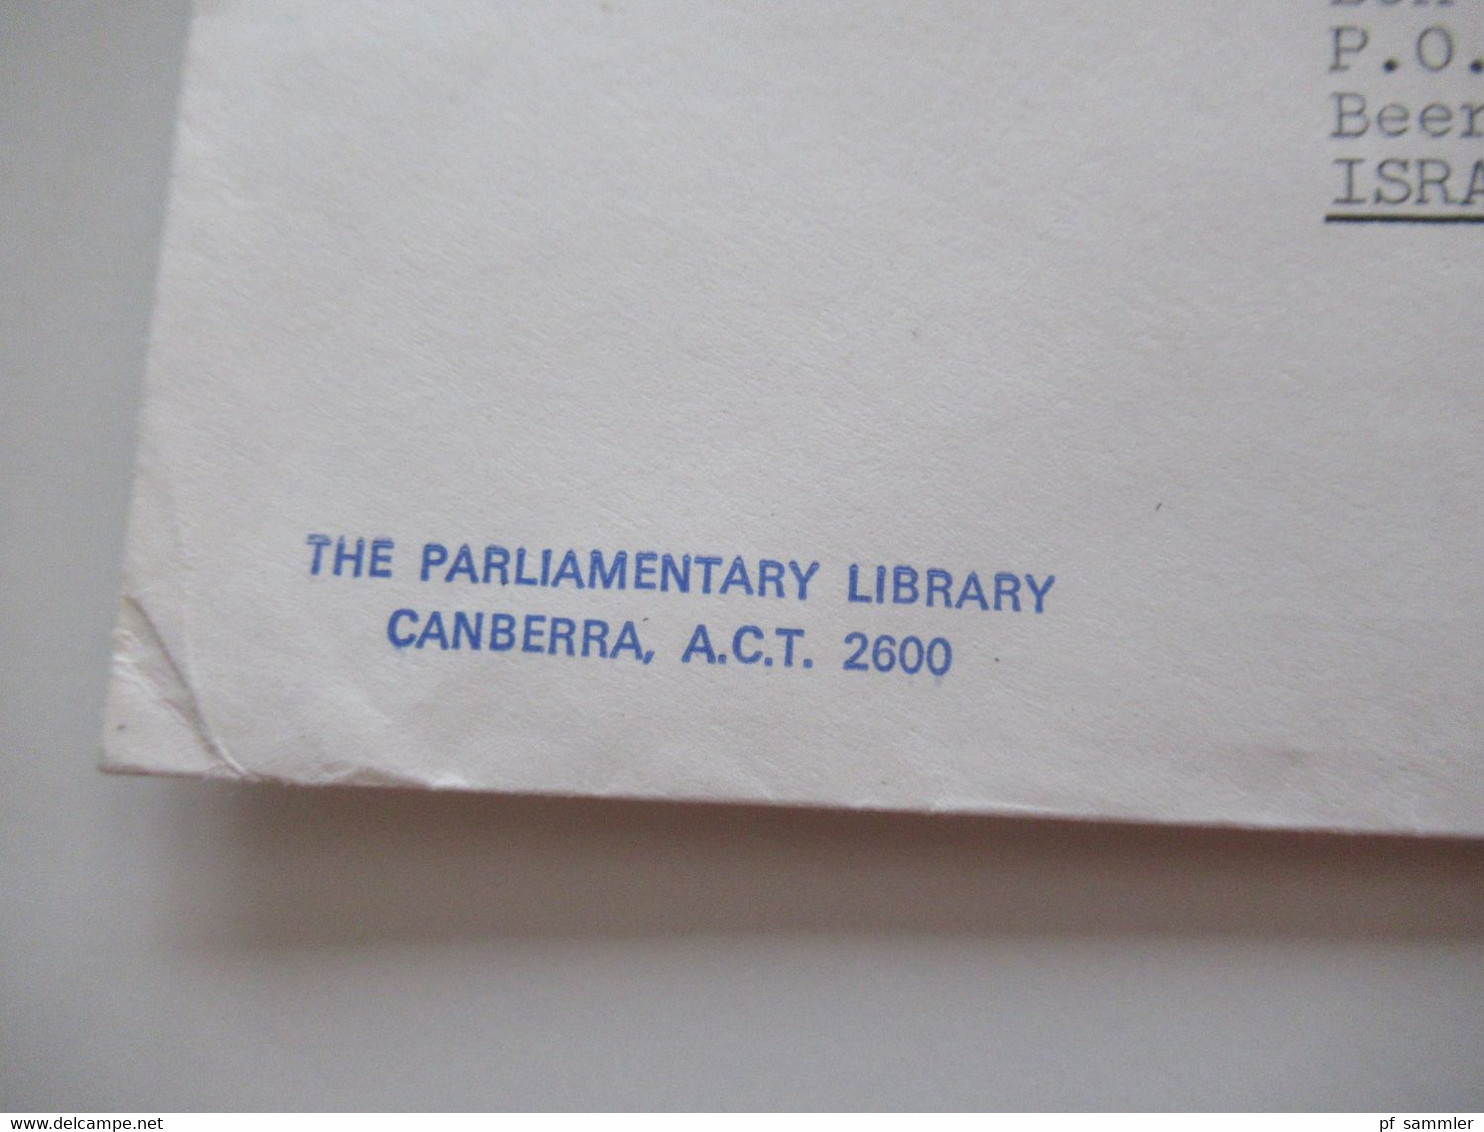 1976 Air Mail Nach Israel Freistempel Canberra Parliament House IW 9 Postage Paid Umschlag The Parliament Library - Covers & Documents